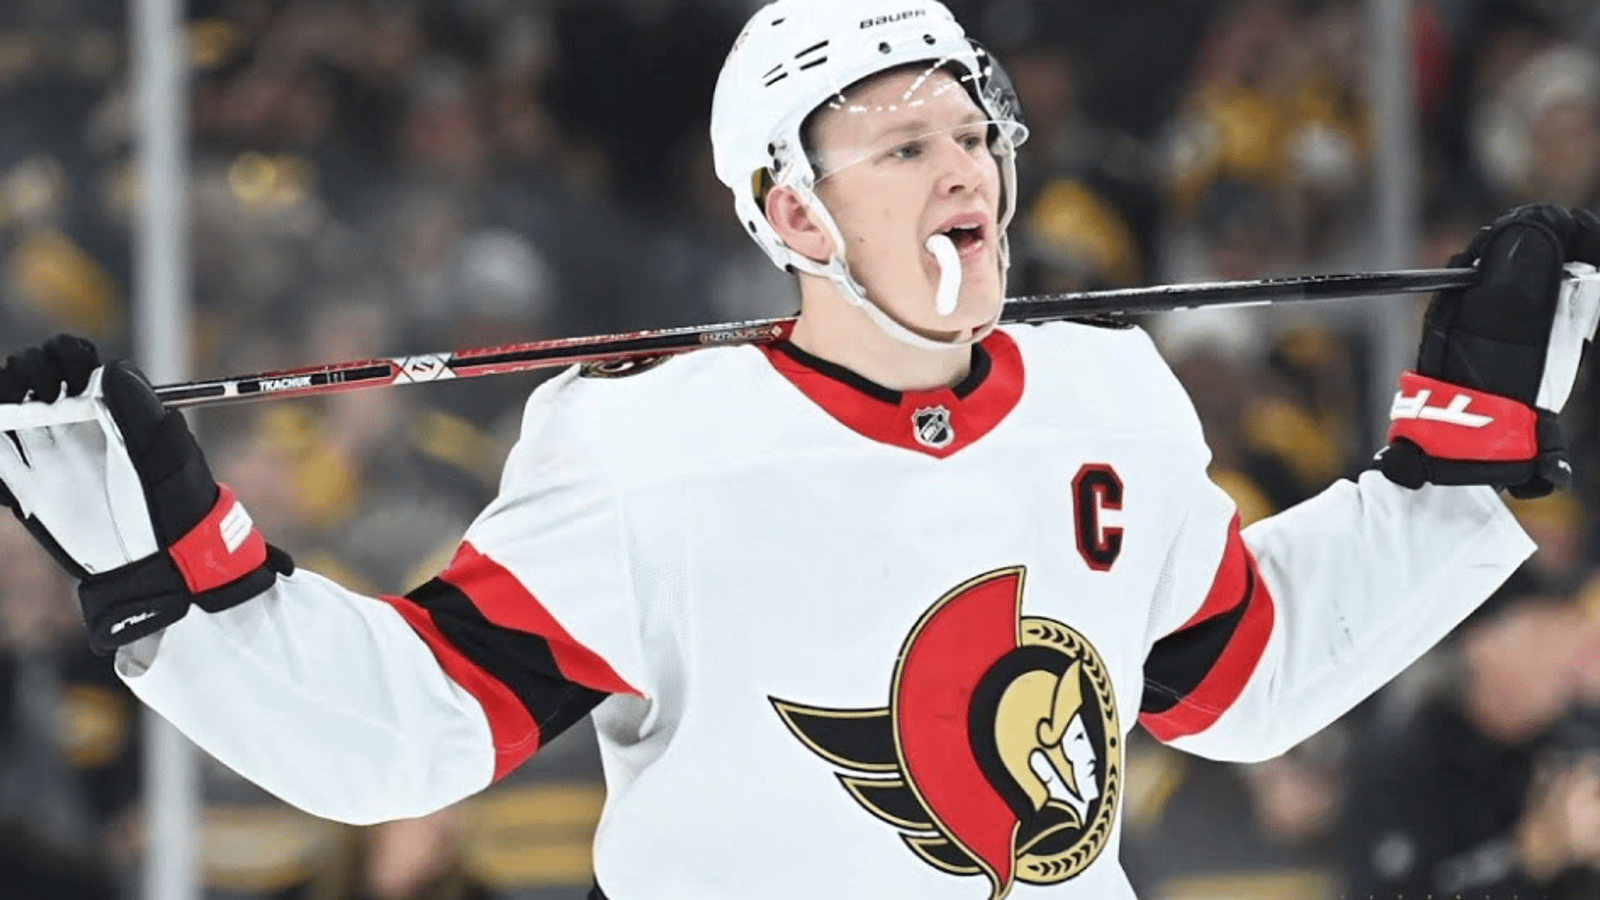 Brady Tkachuk voices his anger over missing playoffs again 